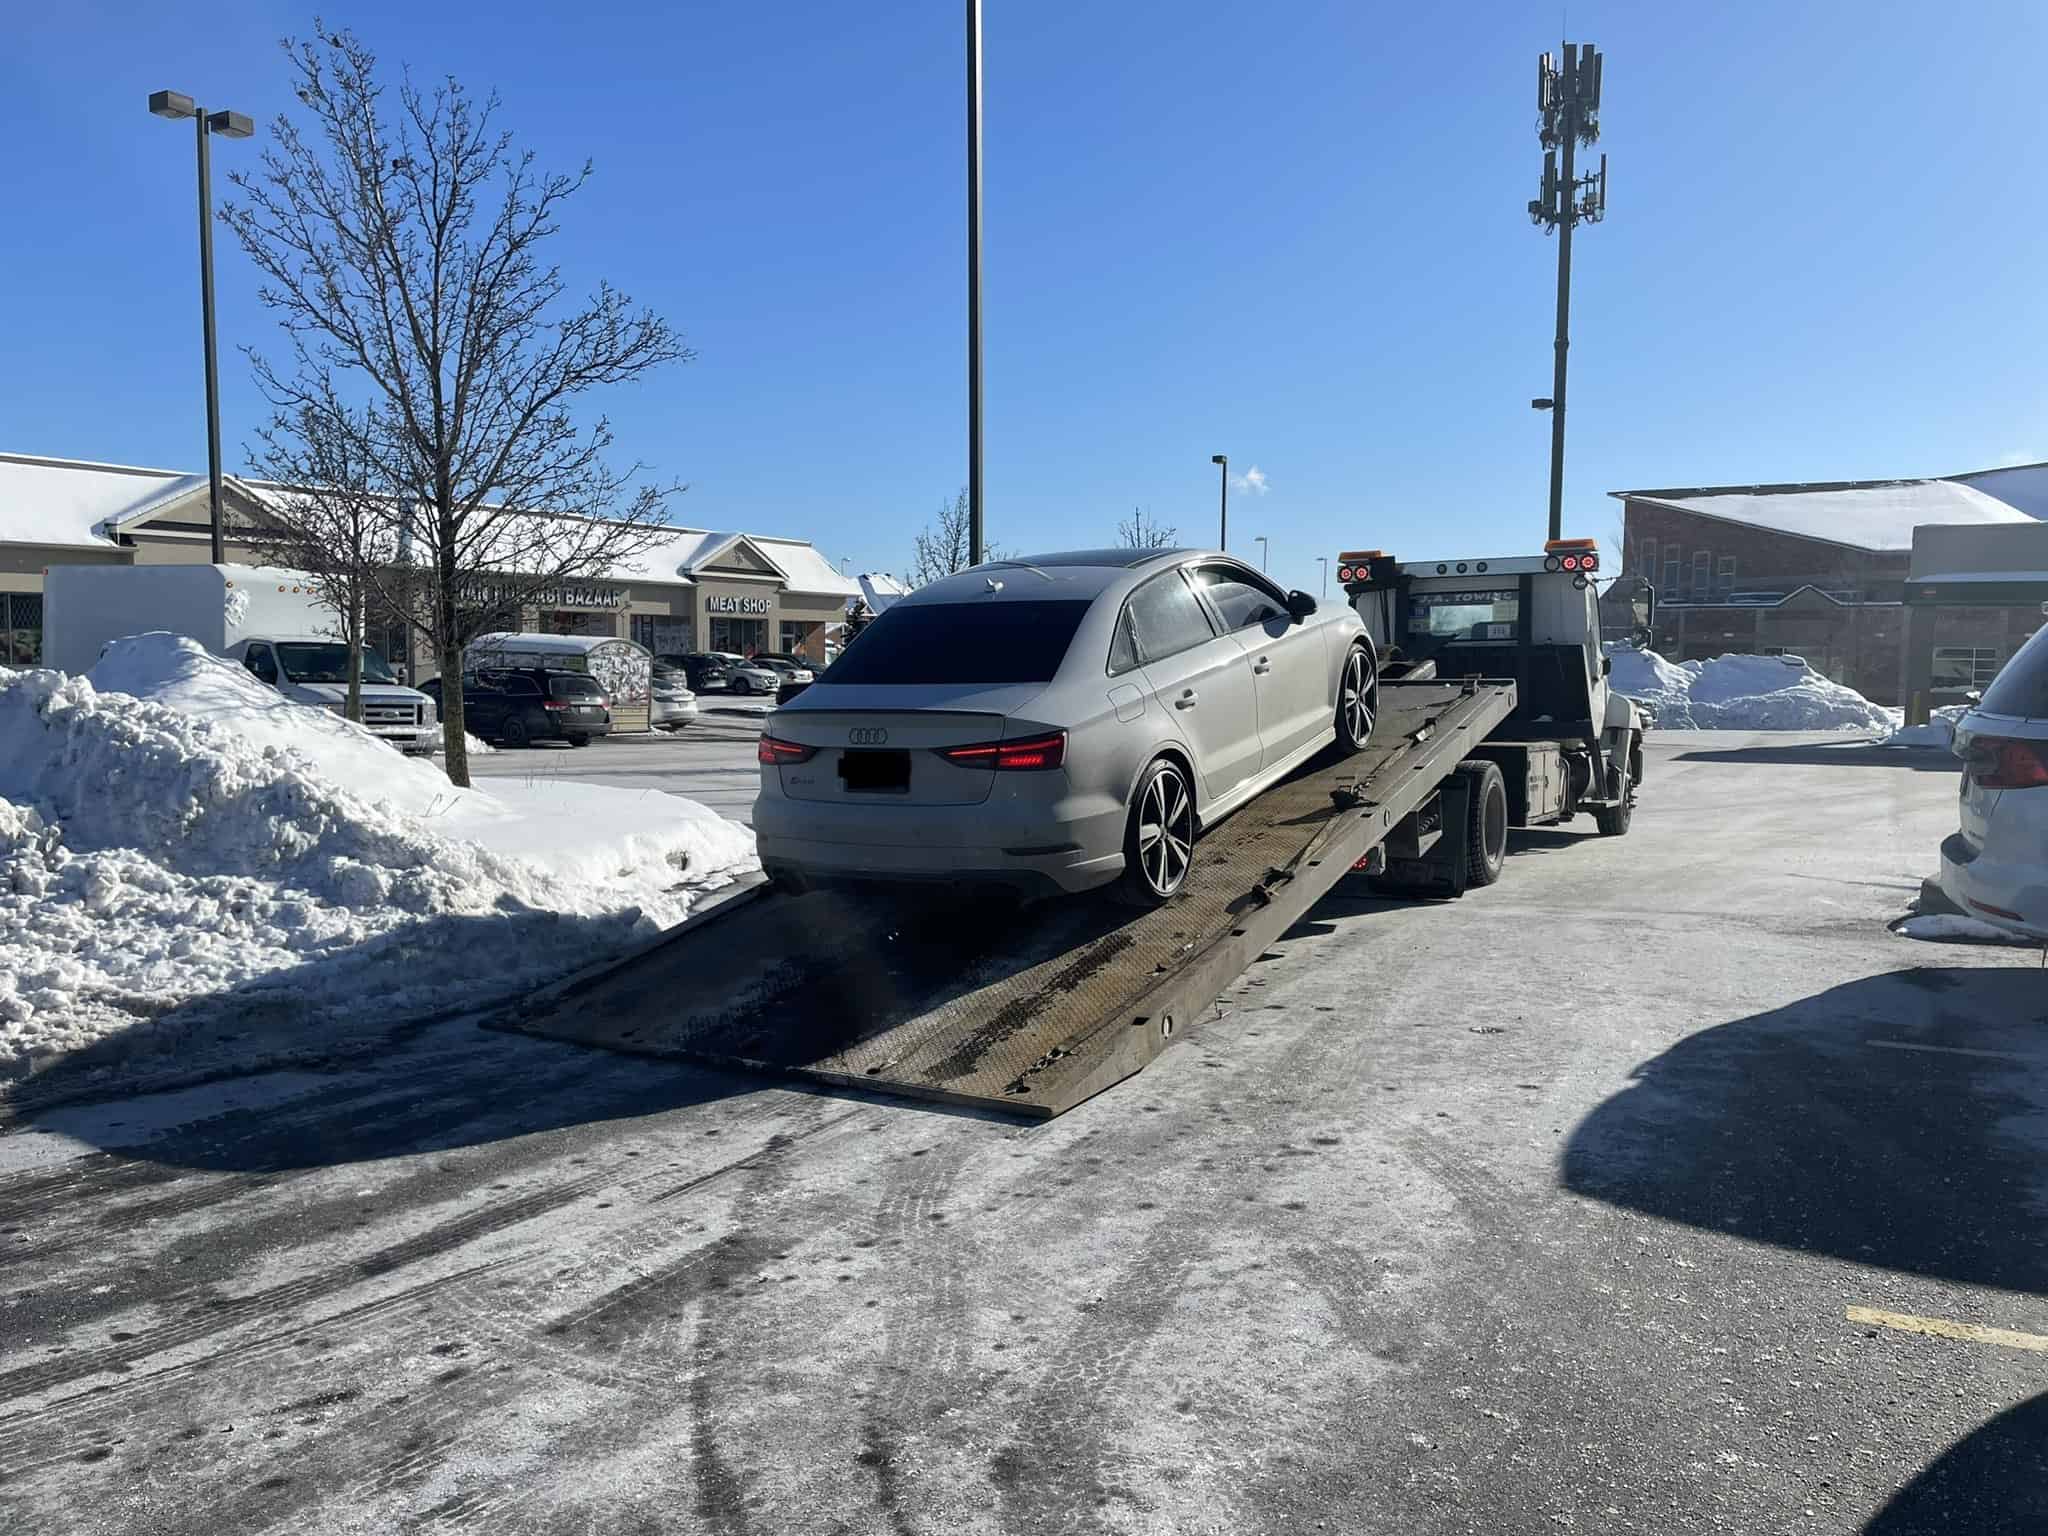 Car towed for failing to stop for police